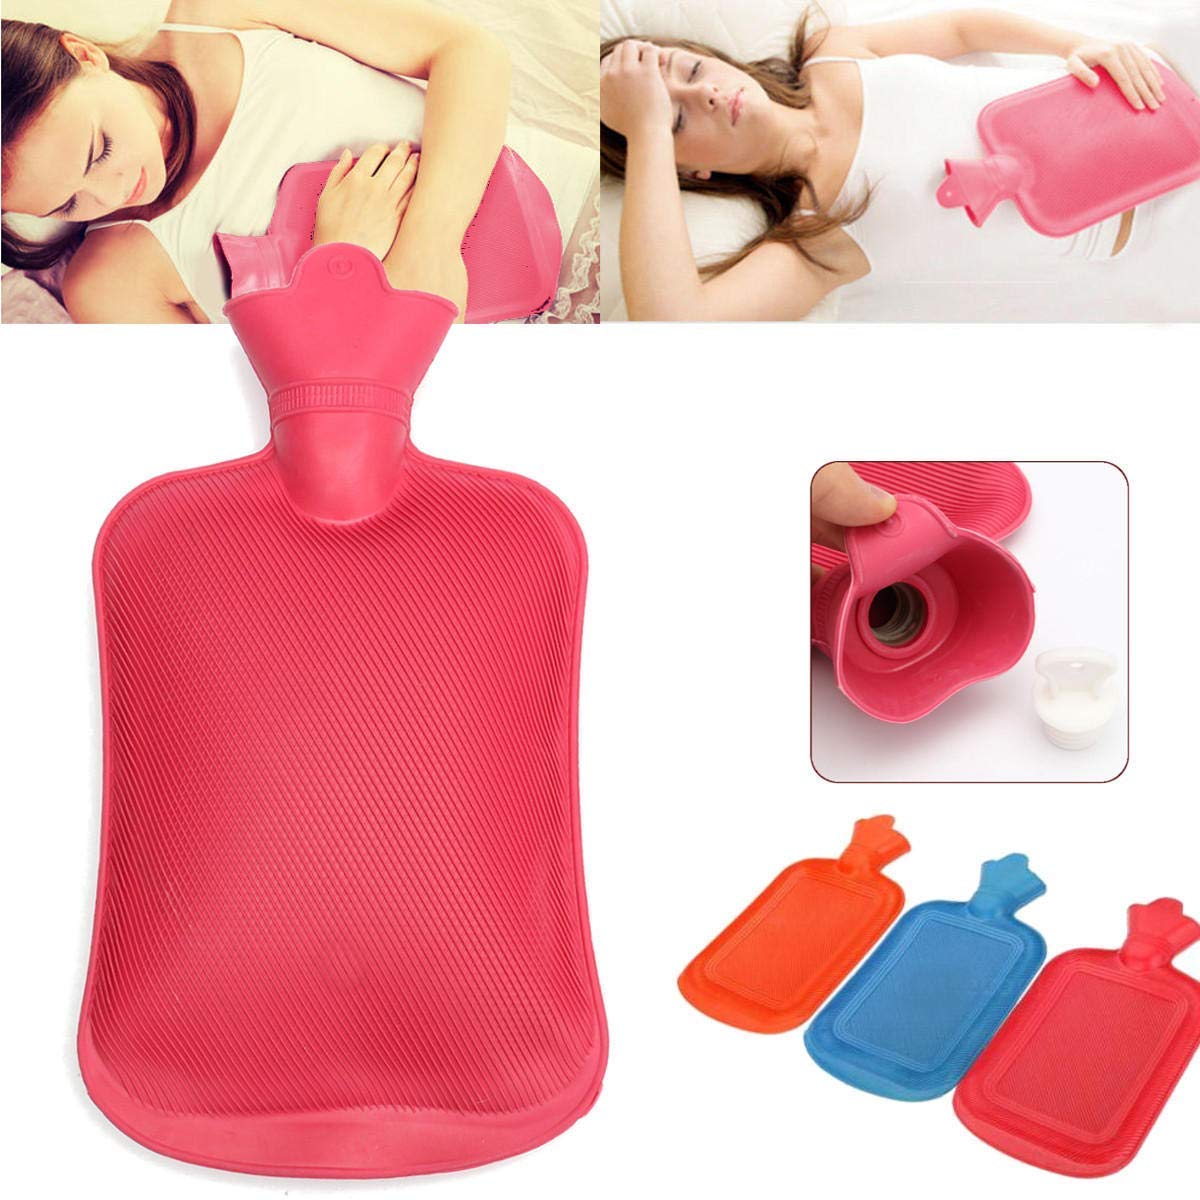 Hot Water Bag or Bottle | Ideal for Back Pain and Body Ache | Heating Pad for Pain Relief | 1Pcs. 2L